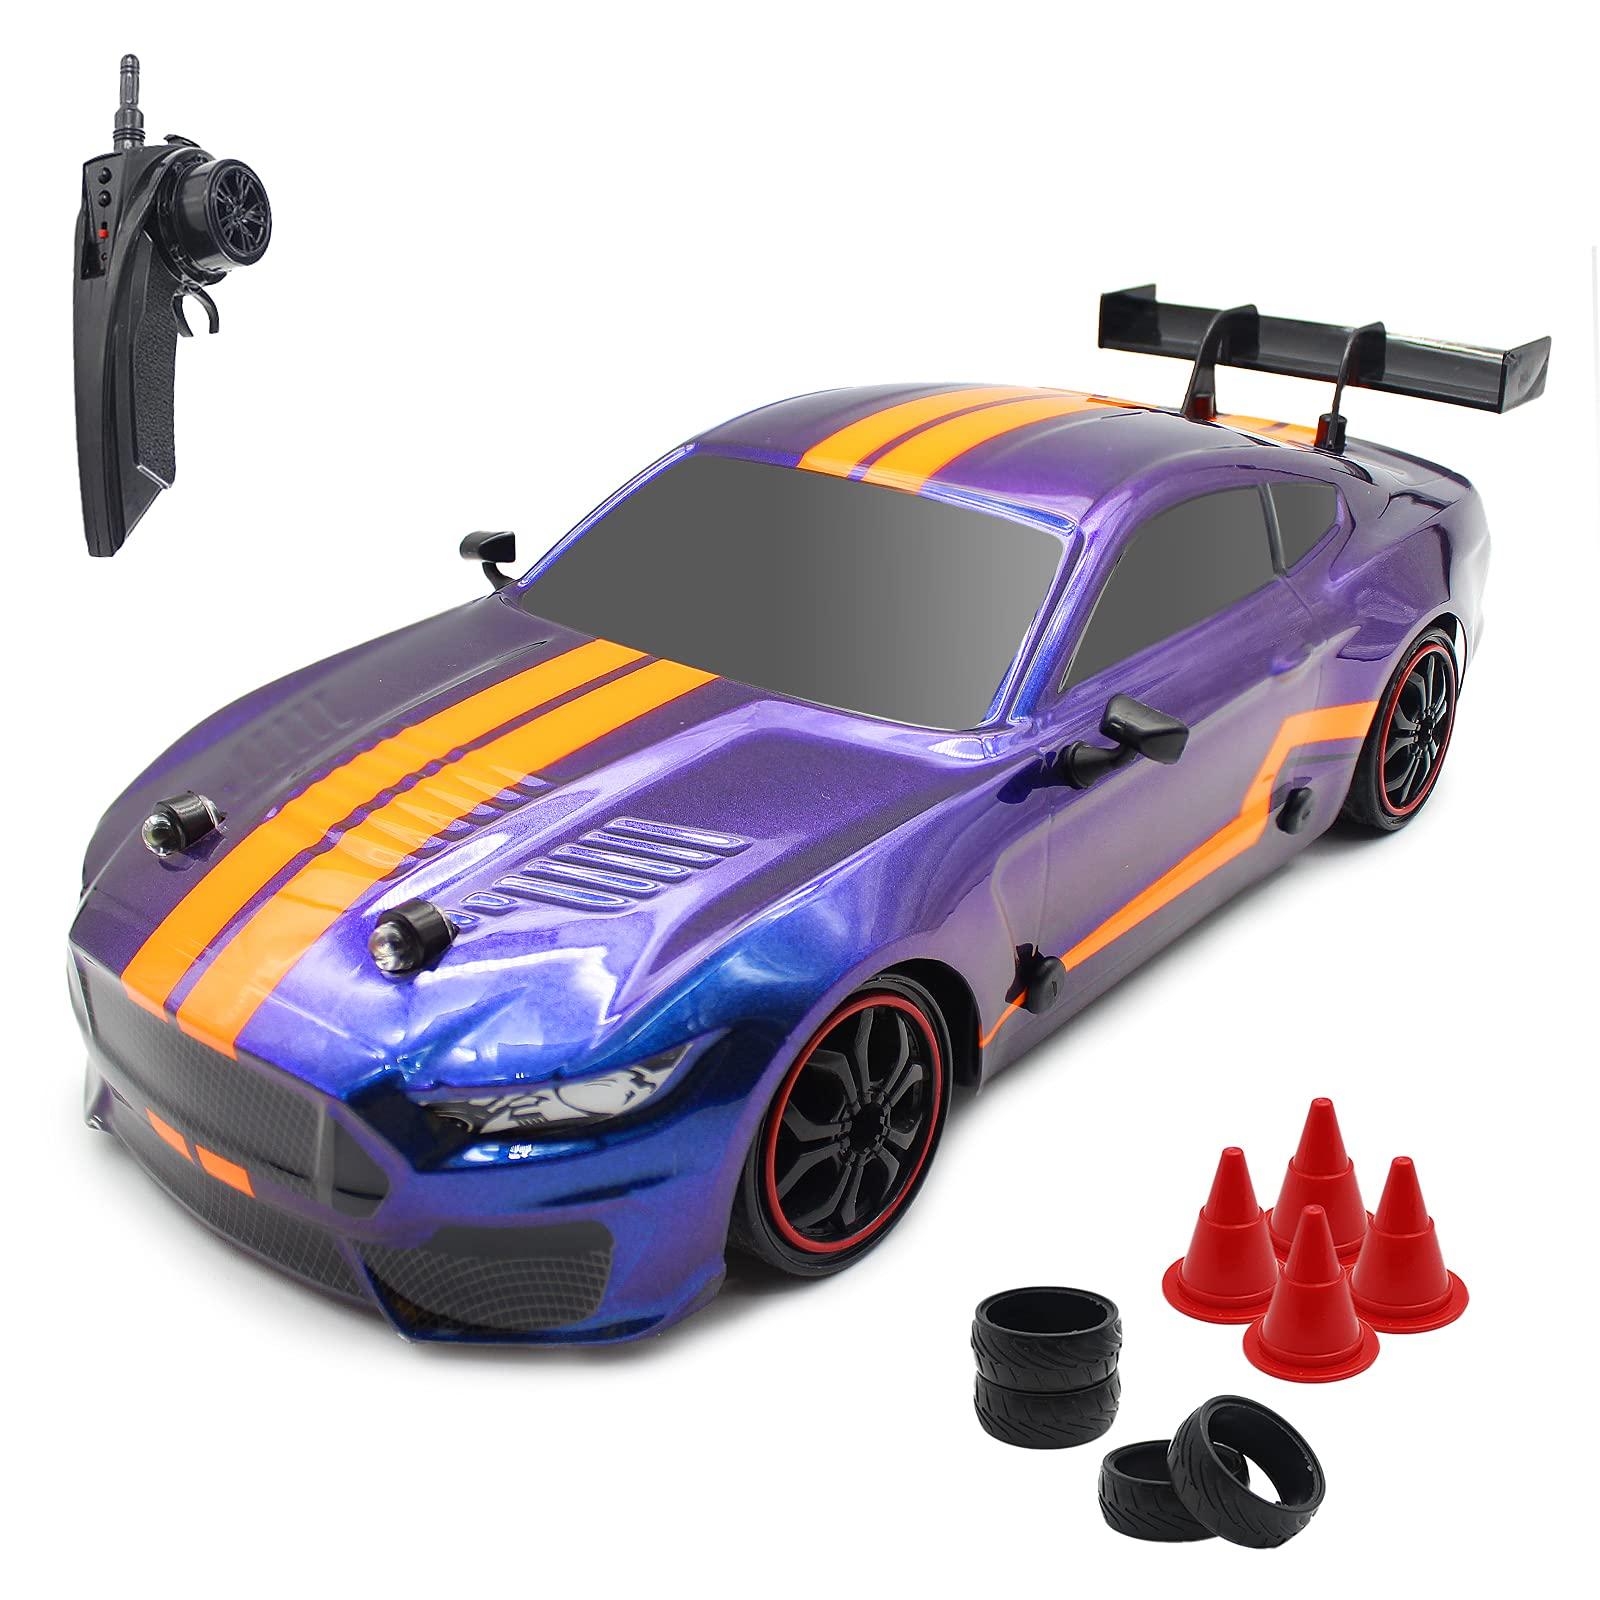 Drift Rc Cars Nitro: Finding the Perfect Drift RC Car Nitro: Brands, Prices, and Top Speeds to Consider